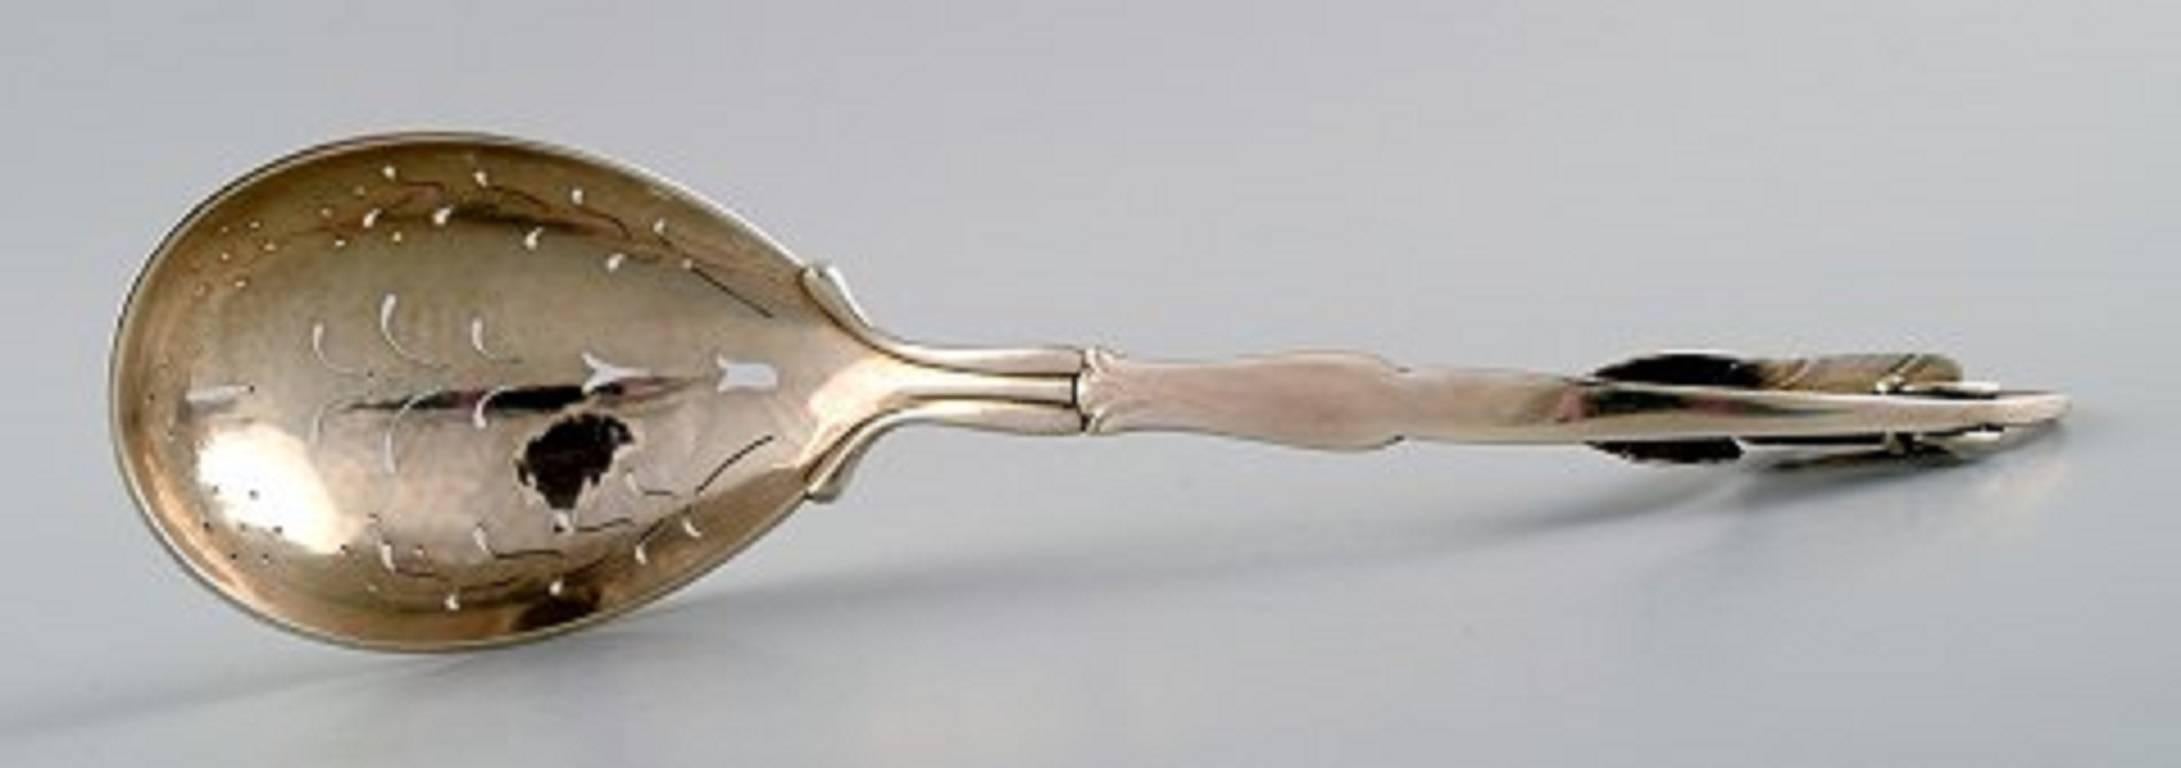 Georg Jensen ornamental no. 141, large serving spoon, berries spoon.

Measures: Length 20.5 cm.

Marked.

Georg Jensen silversmiths 1915-1930.

Excellent condition.